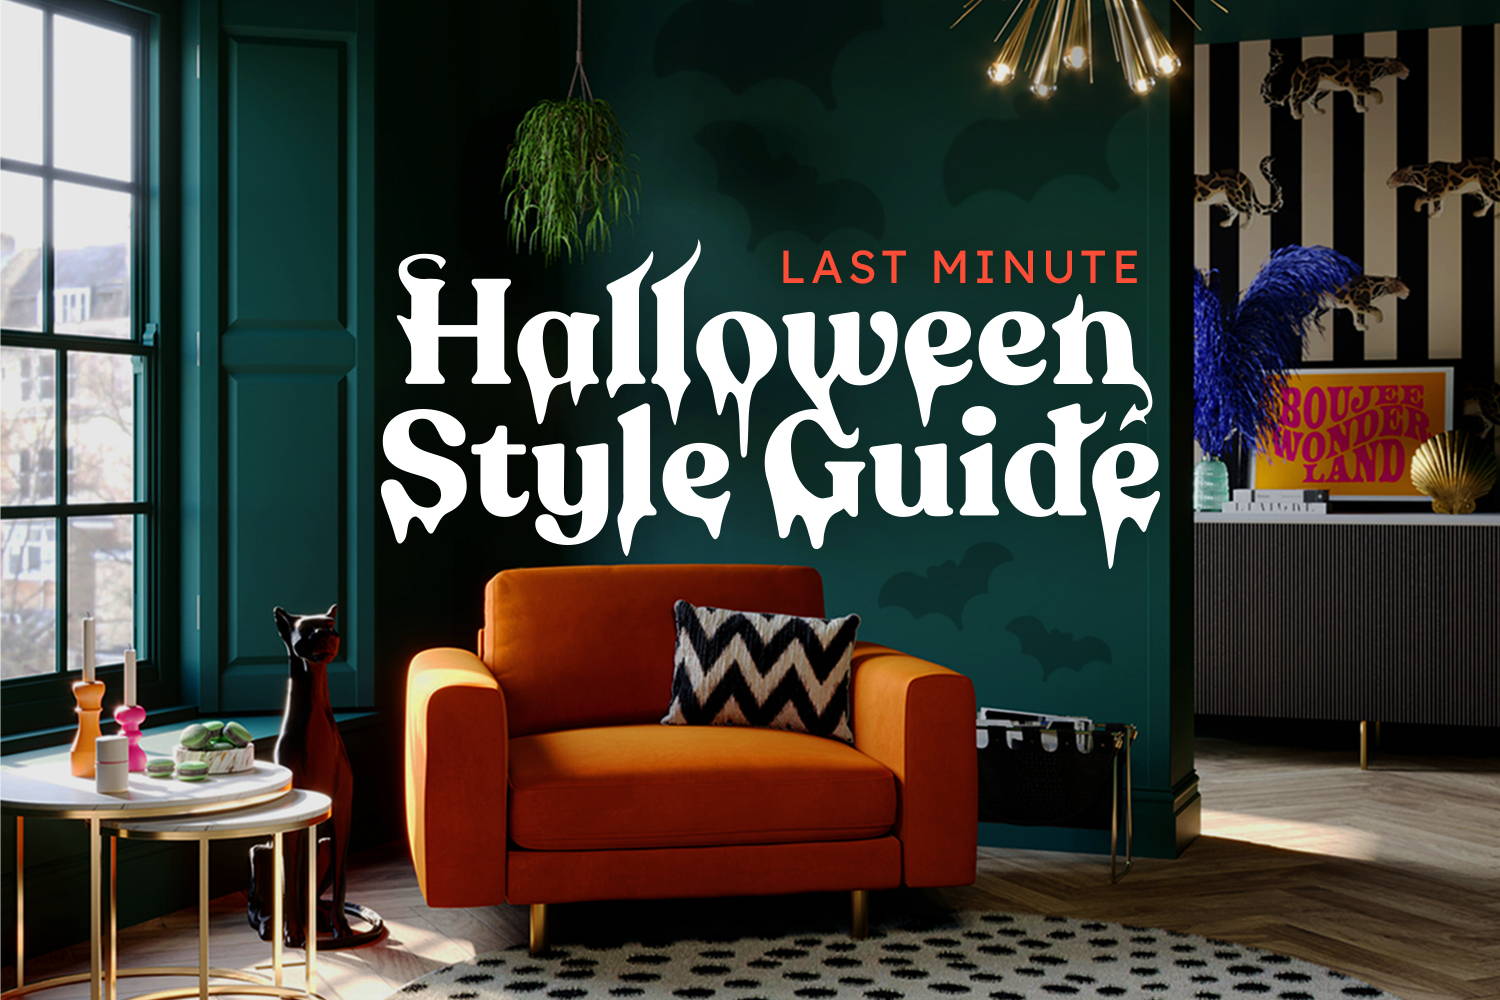  Last Minute Halloween Style Guide 